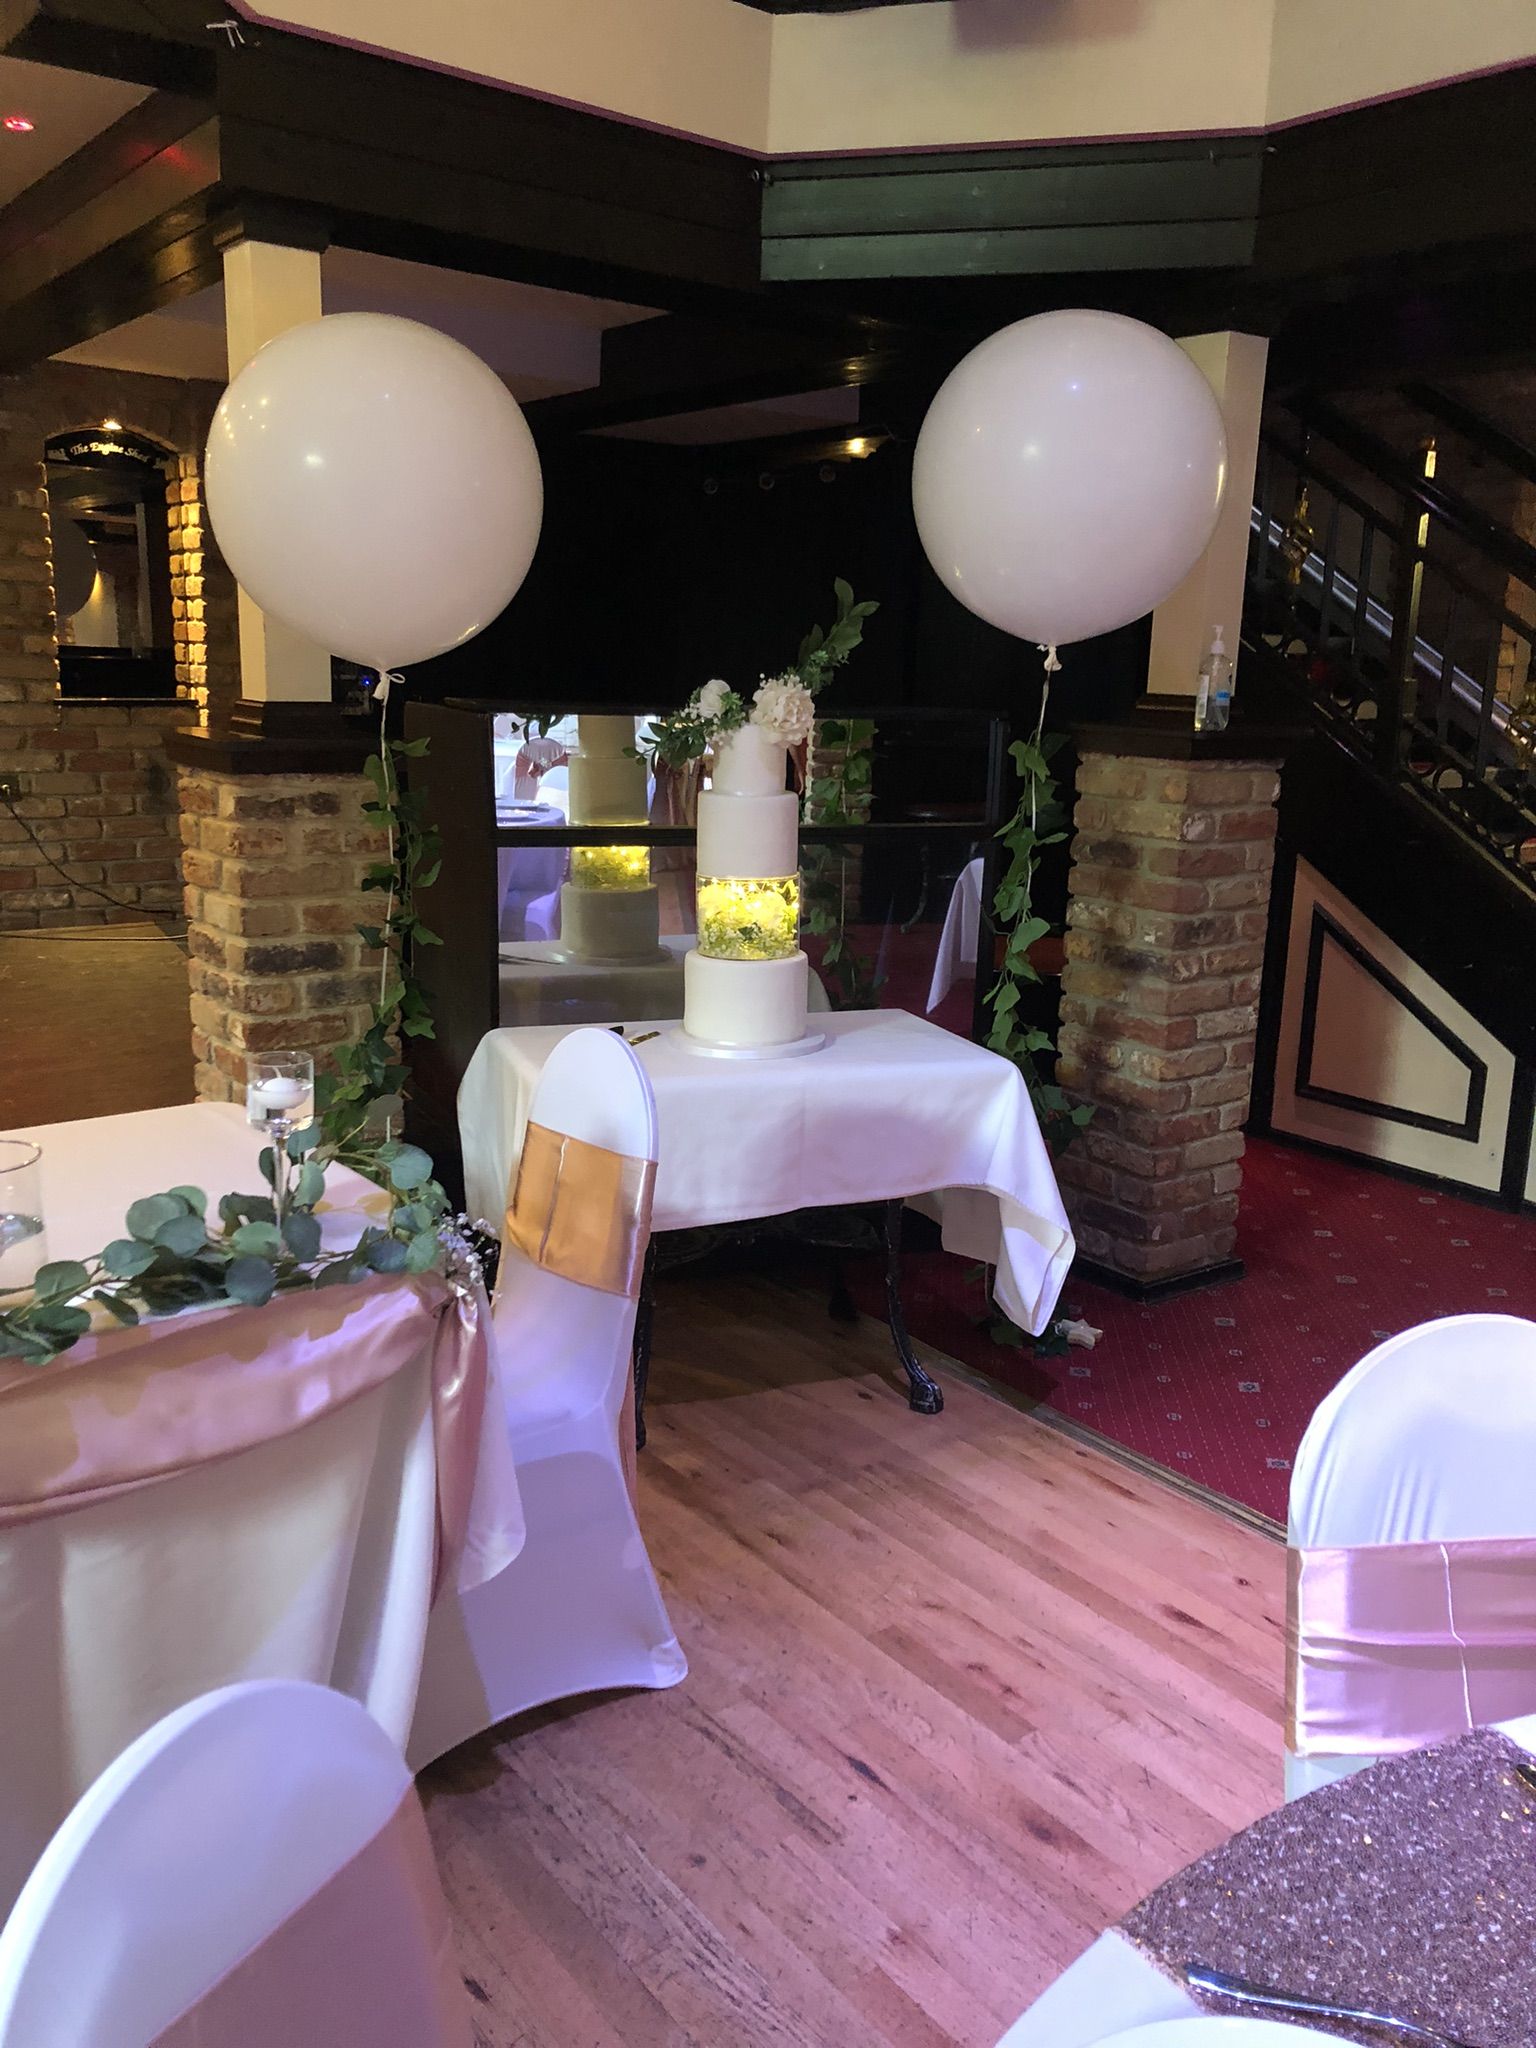 a table with a cake and balloons in a room.